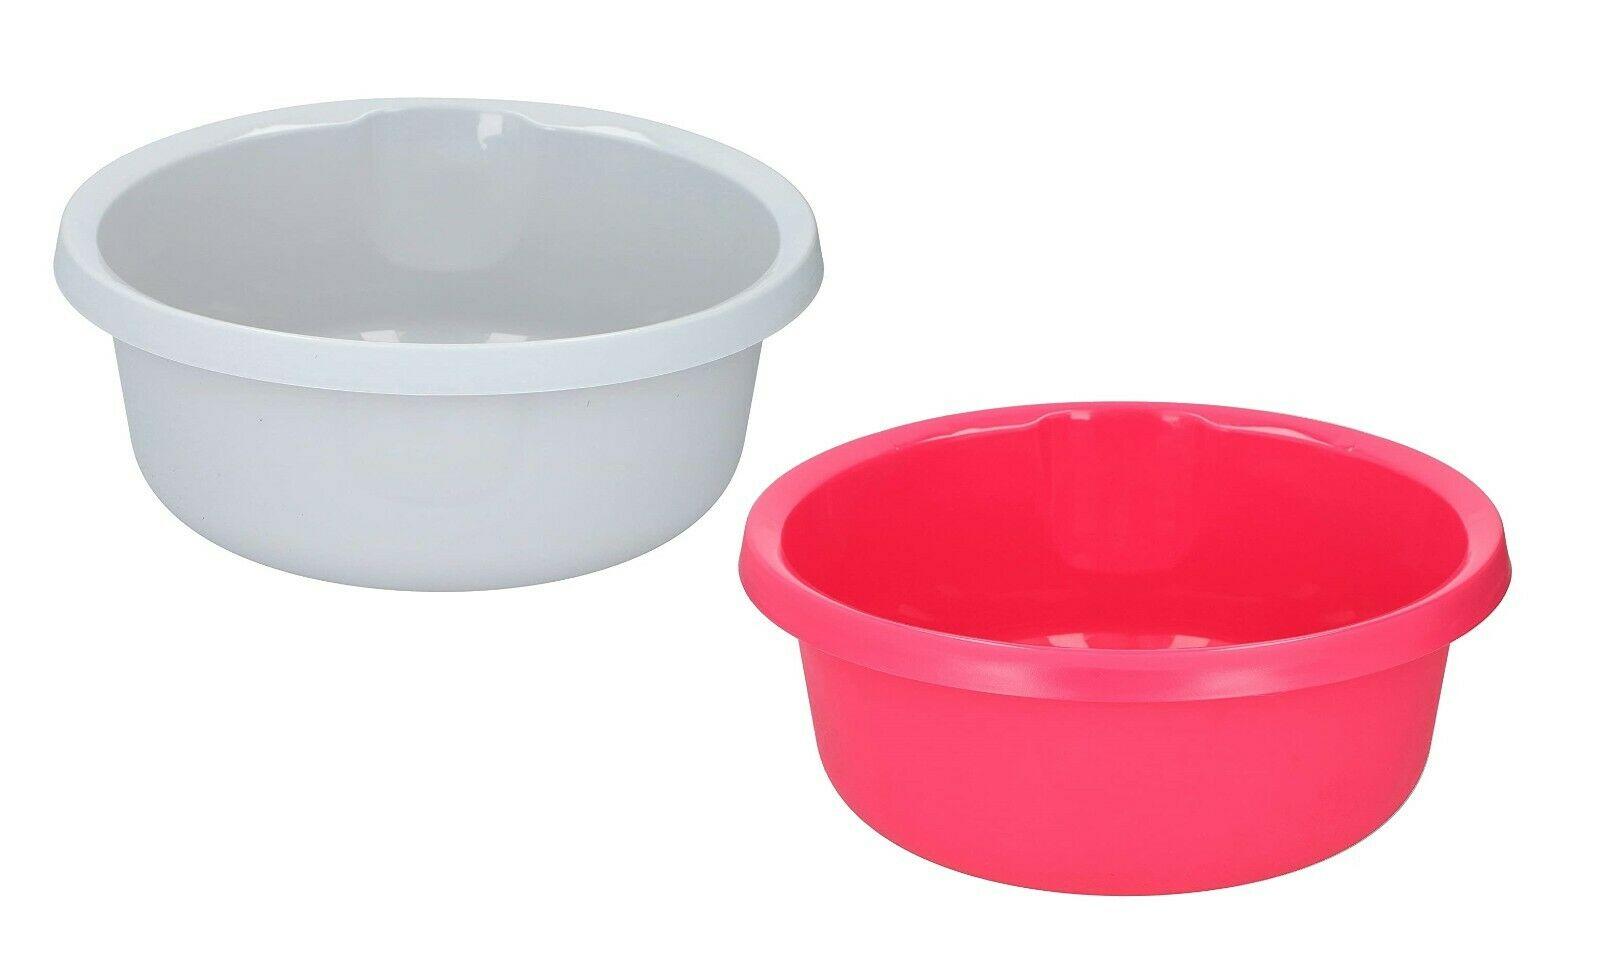 Large 36cm Plastic Deep Round Bowl Oatmeal Home Commercial Kitchen Storage